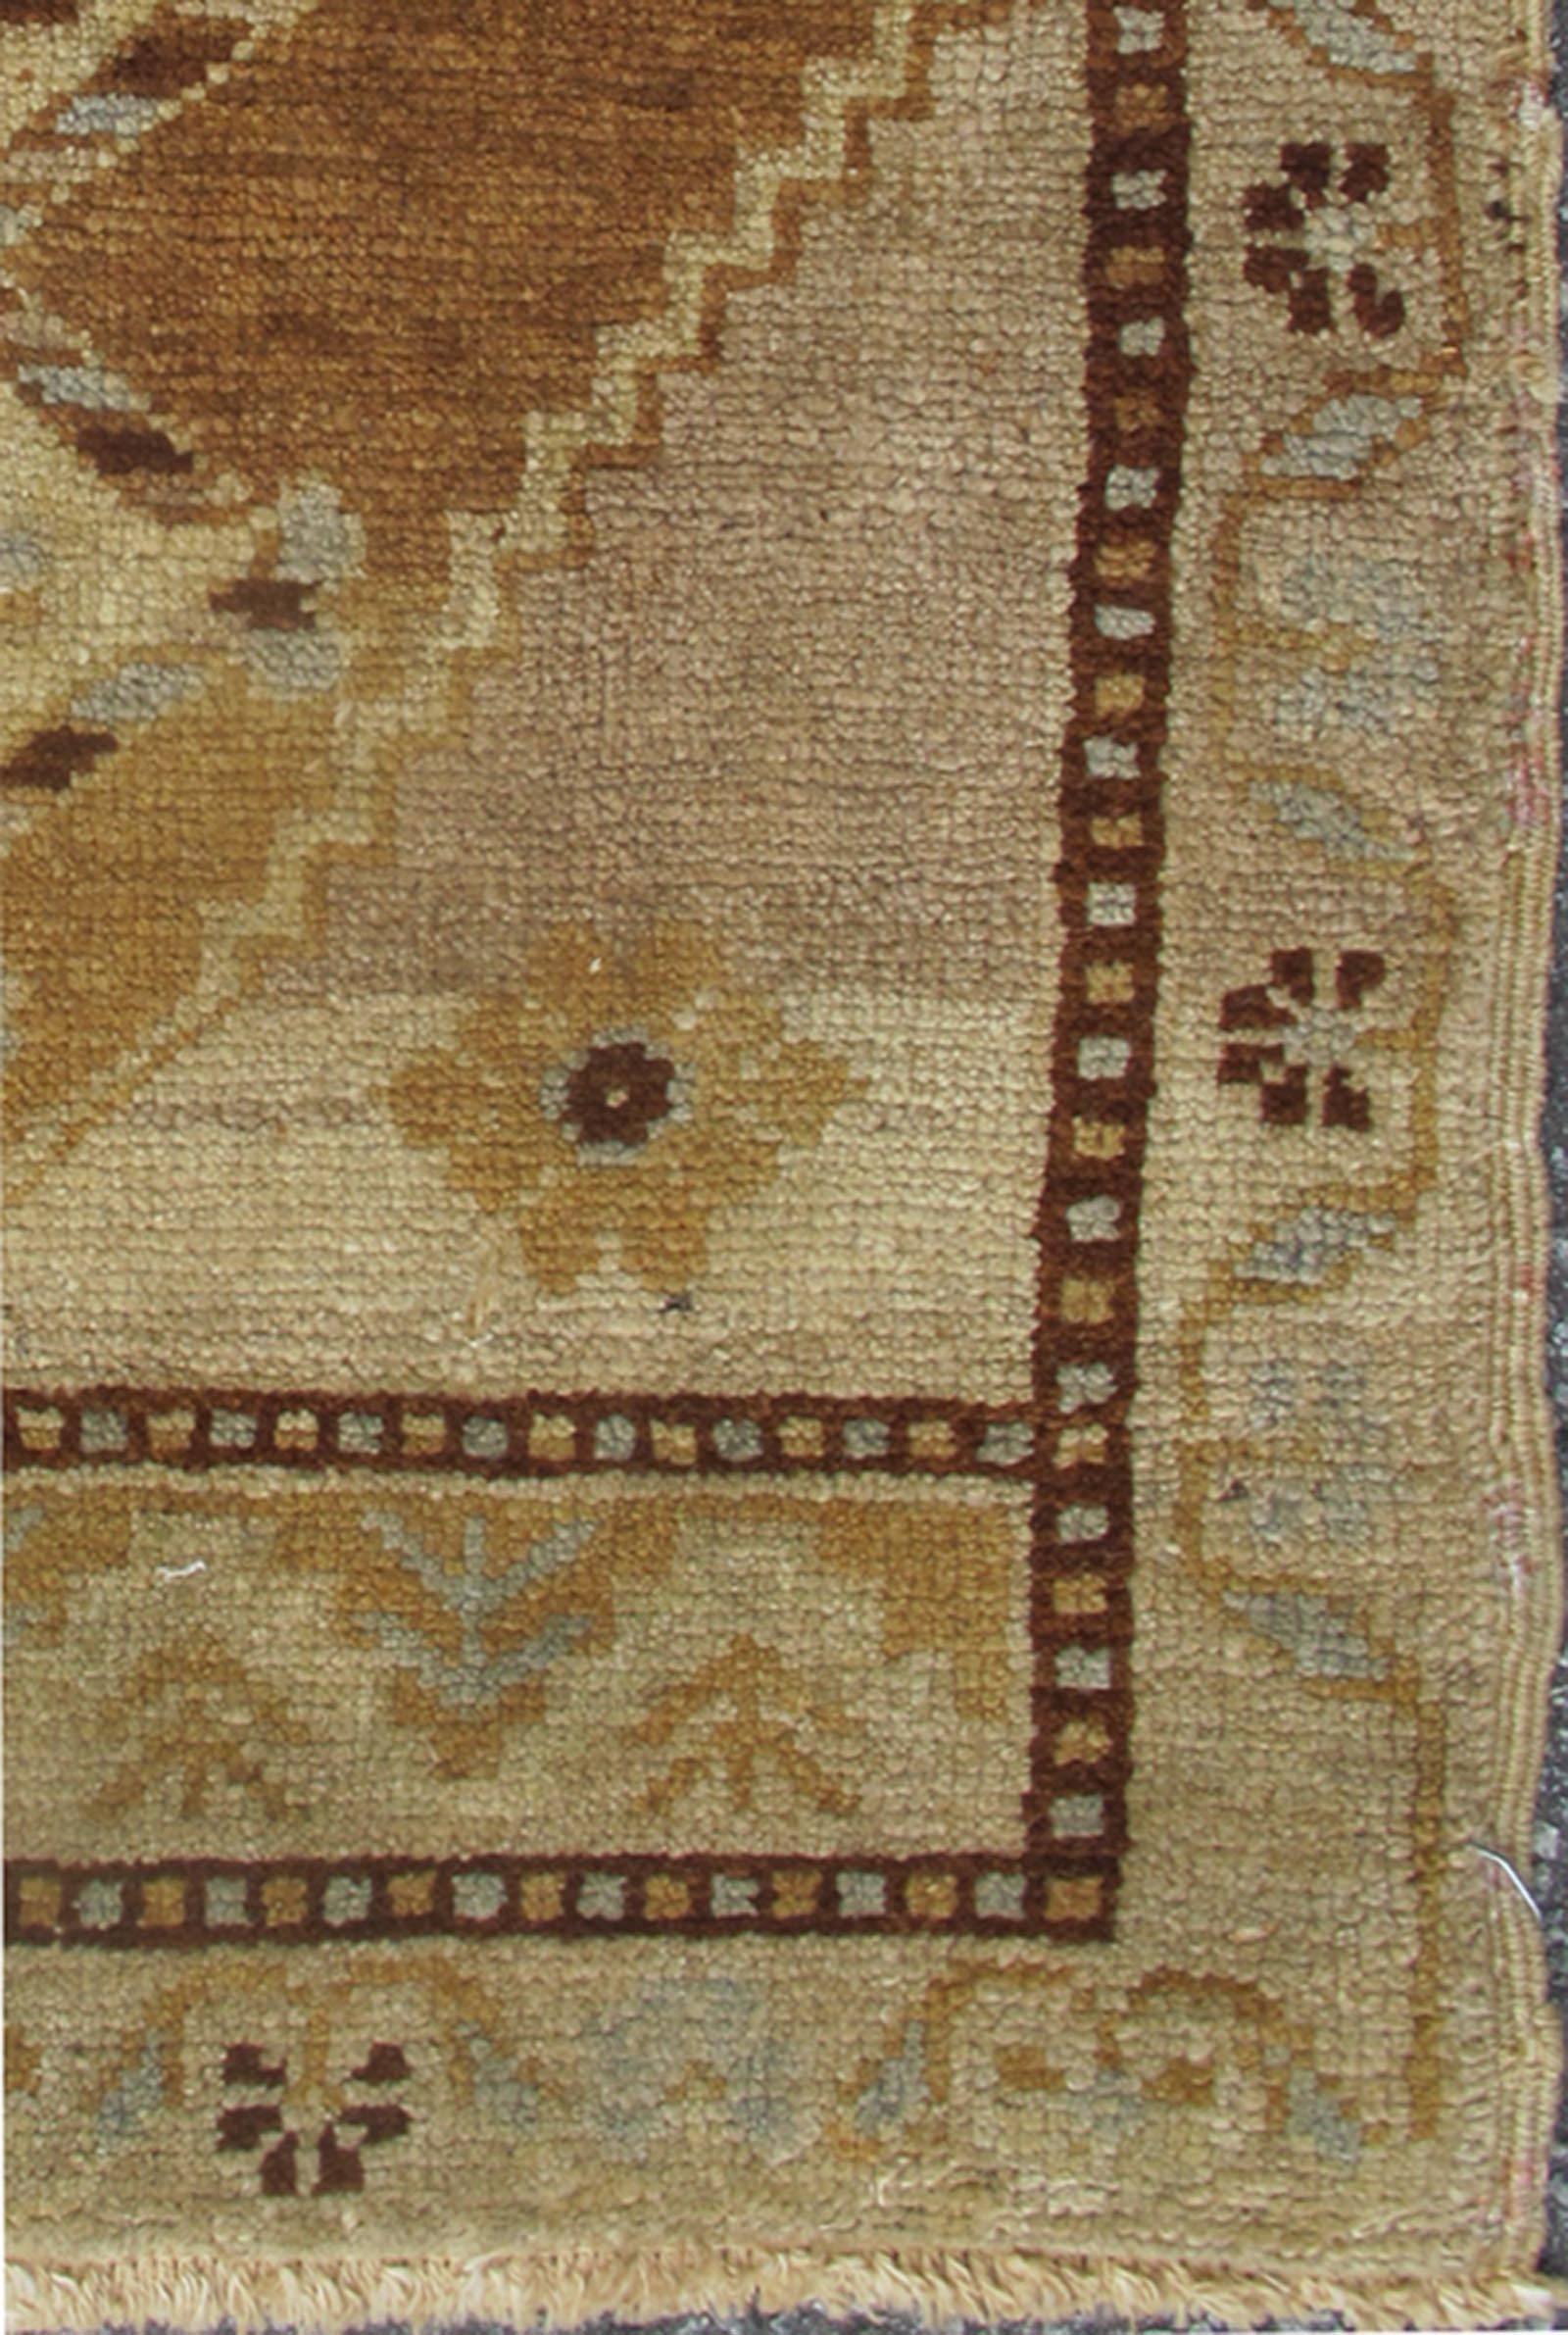 Small Turkish Oushak Carpet with Central Medallion in Light Brown, En-219, 1940's Vintage Small Turkish Oushak Rug. This Turkish Oushak carpet features a central medallion design, as well as smaller botanical elements. The rug's qualities are